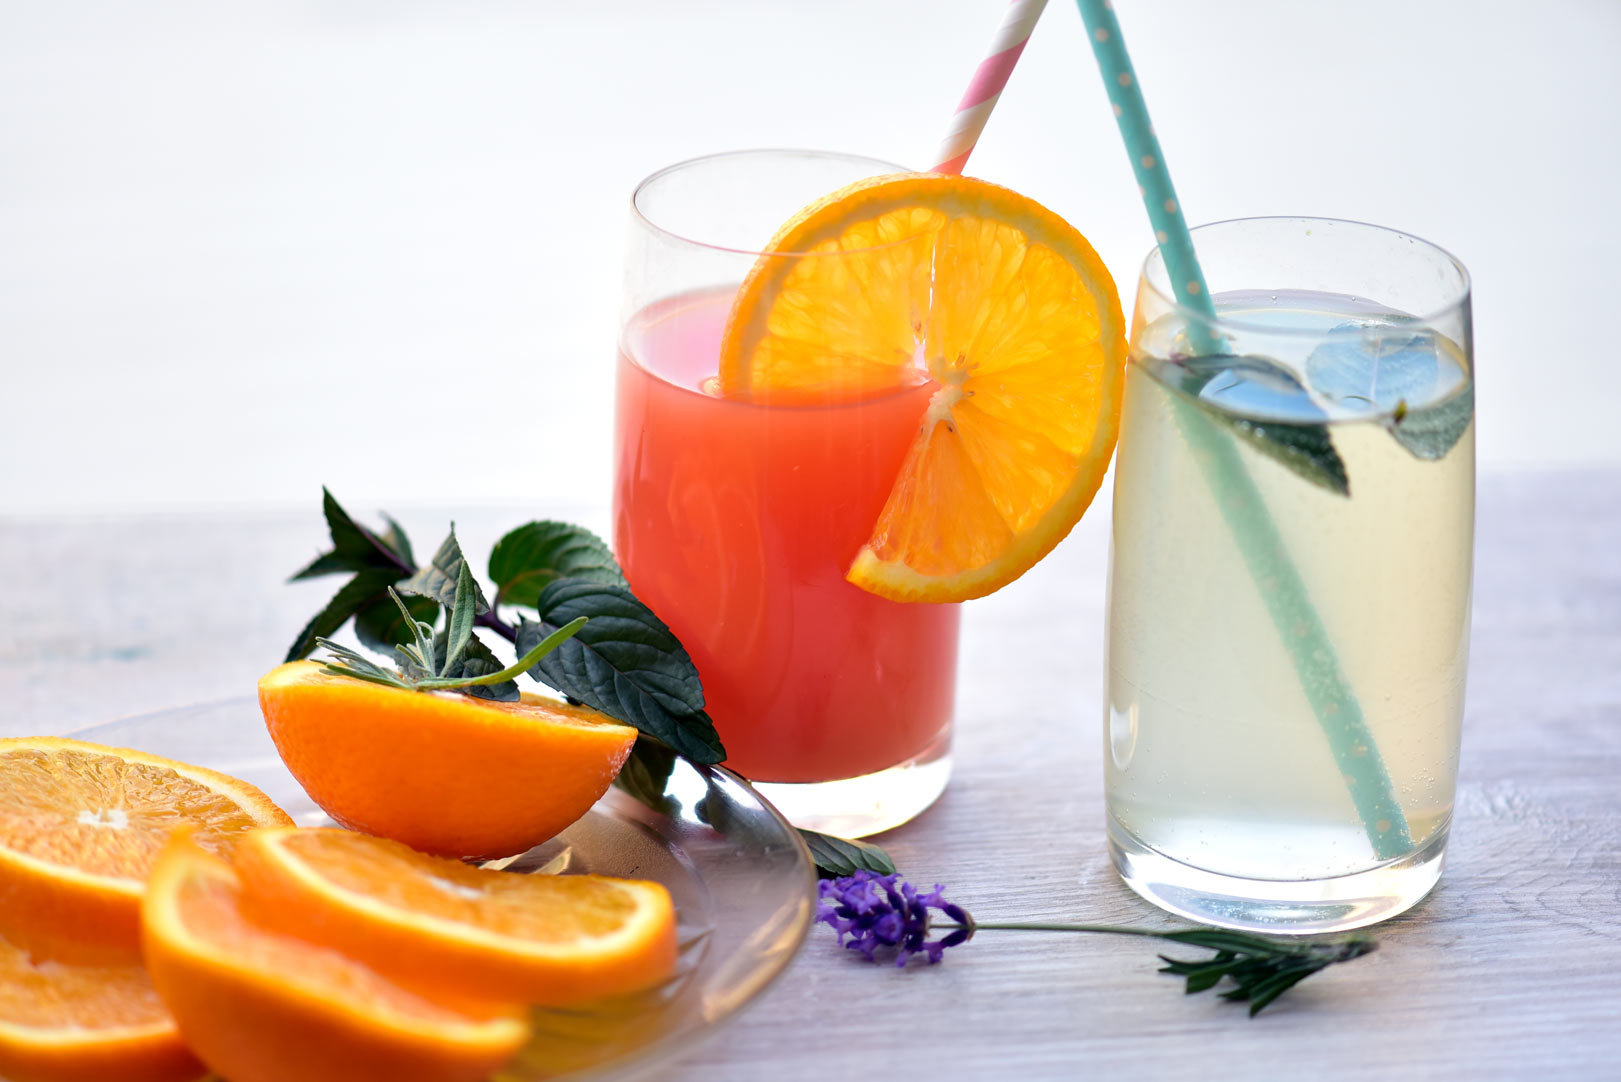 delicious, refreshing, thirst-quenching juices